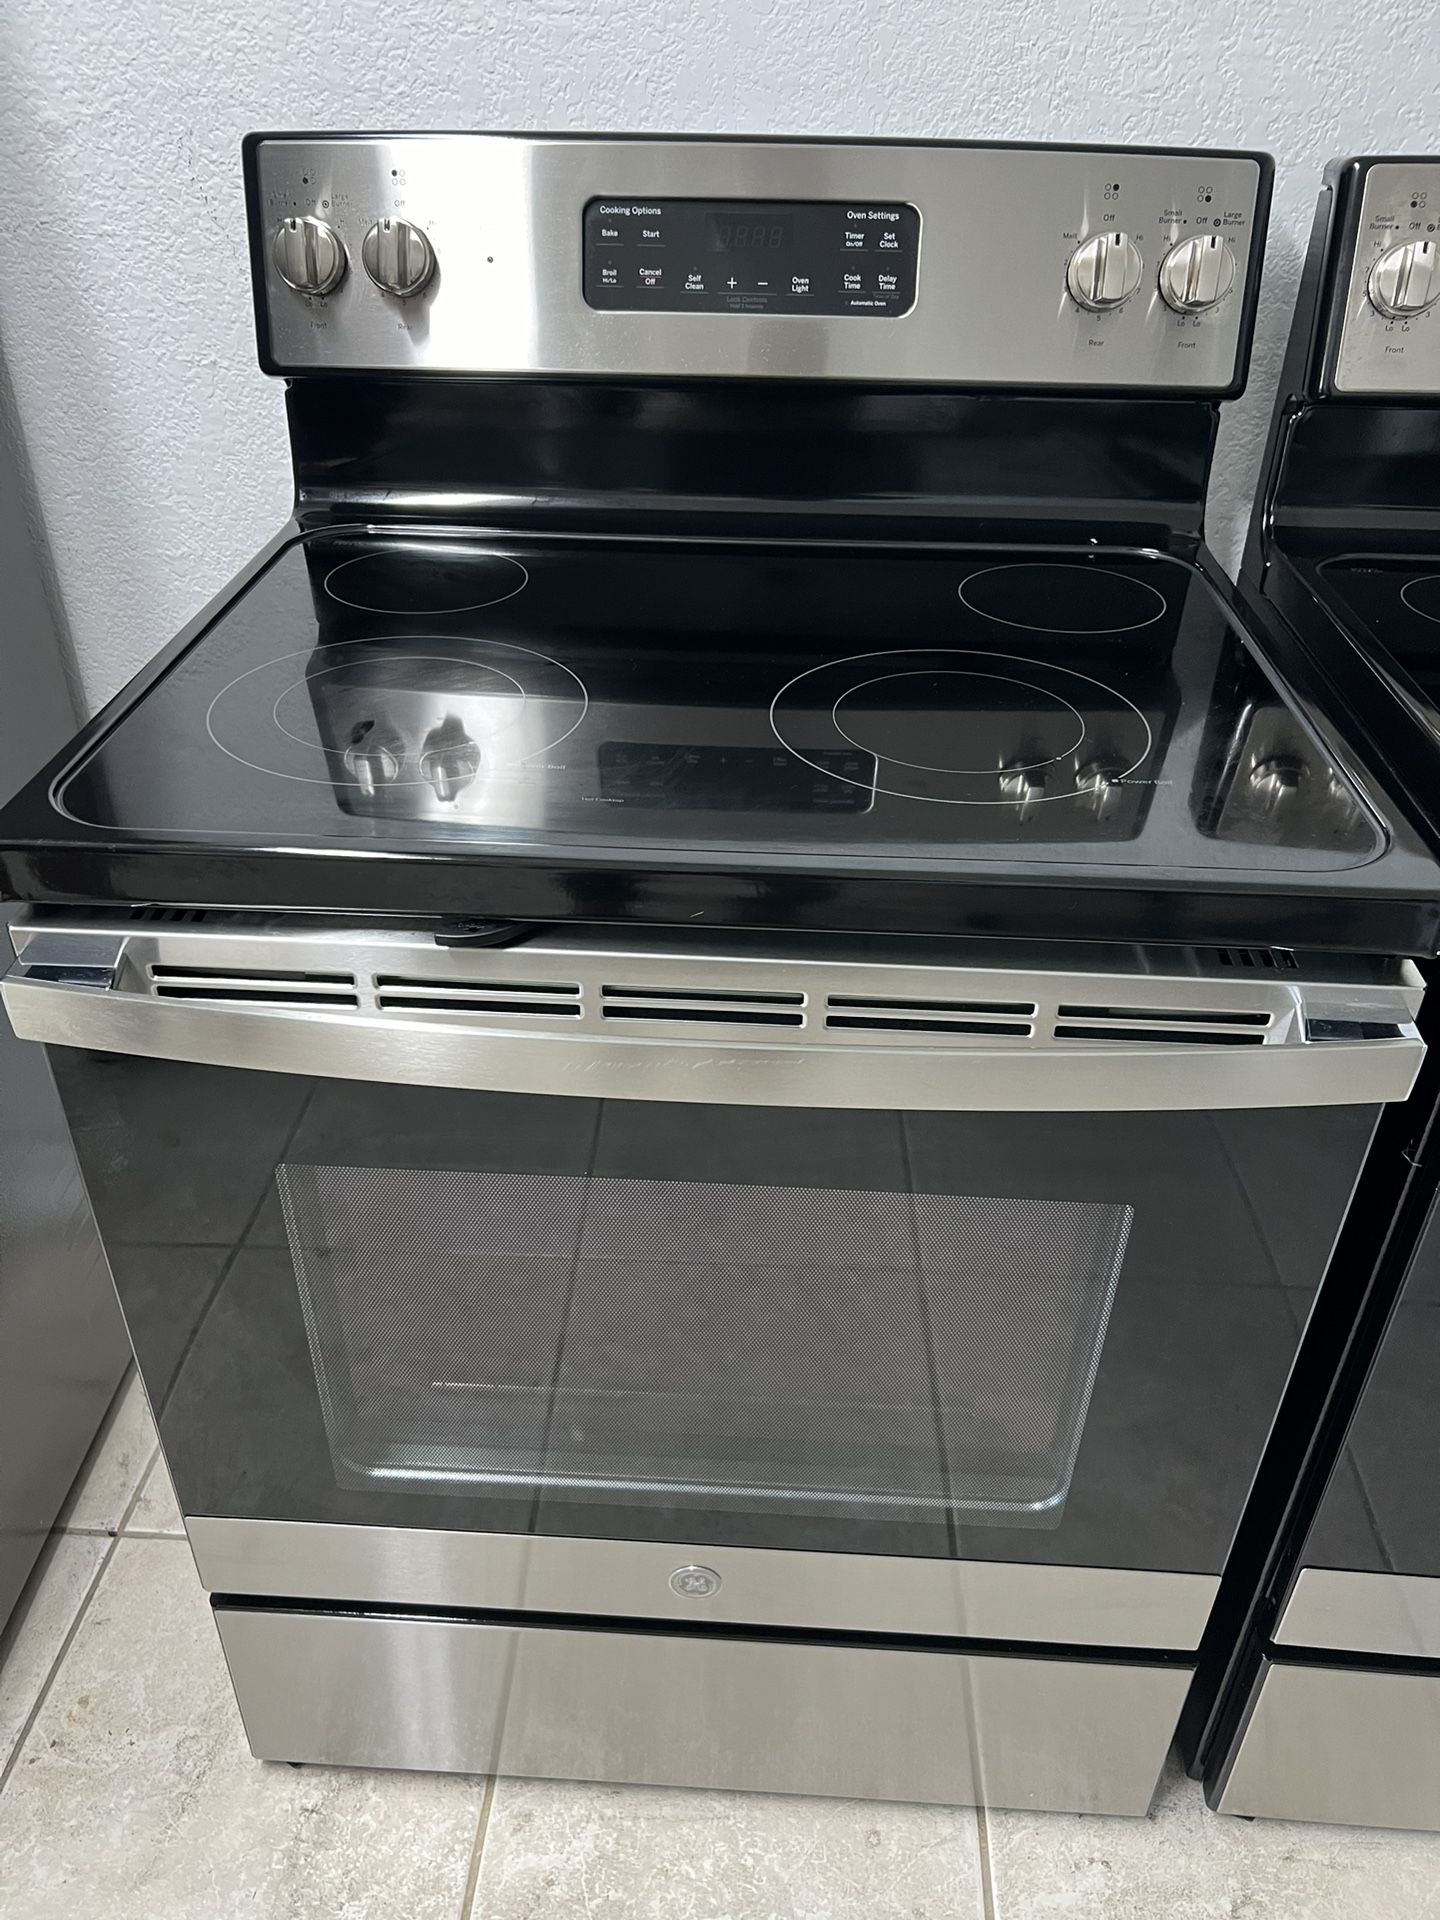 Ge Stove, Dishwasher And Microwave Brand New 